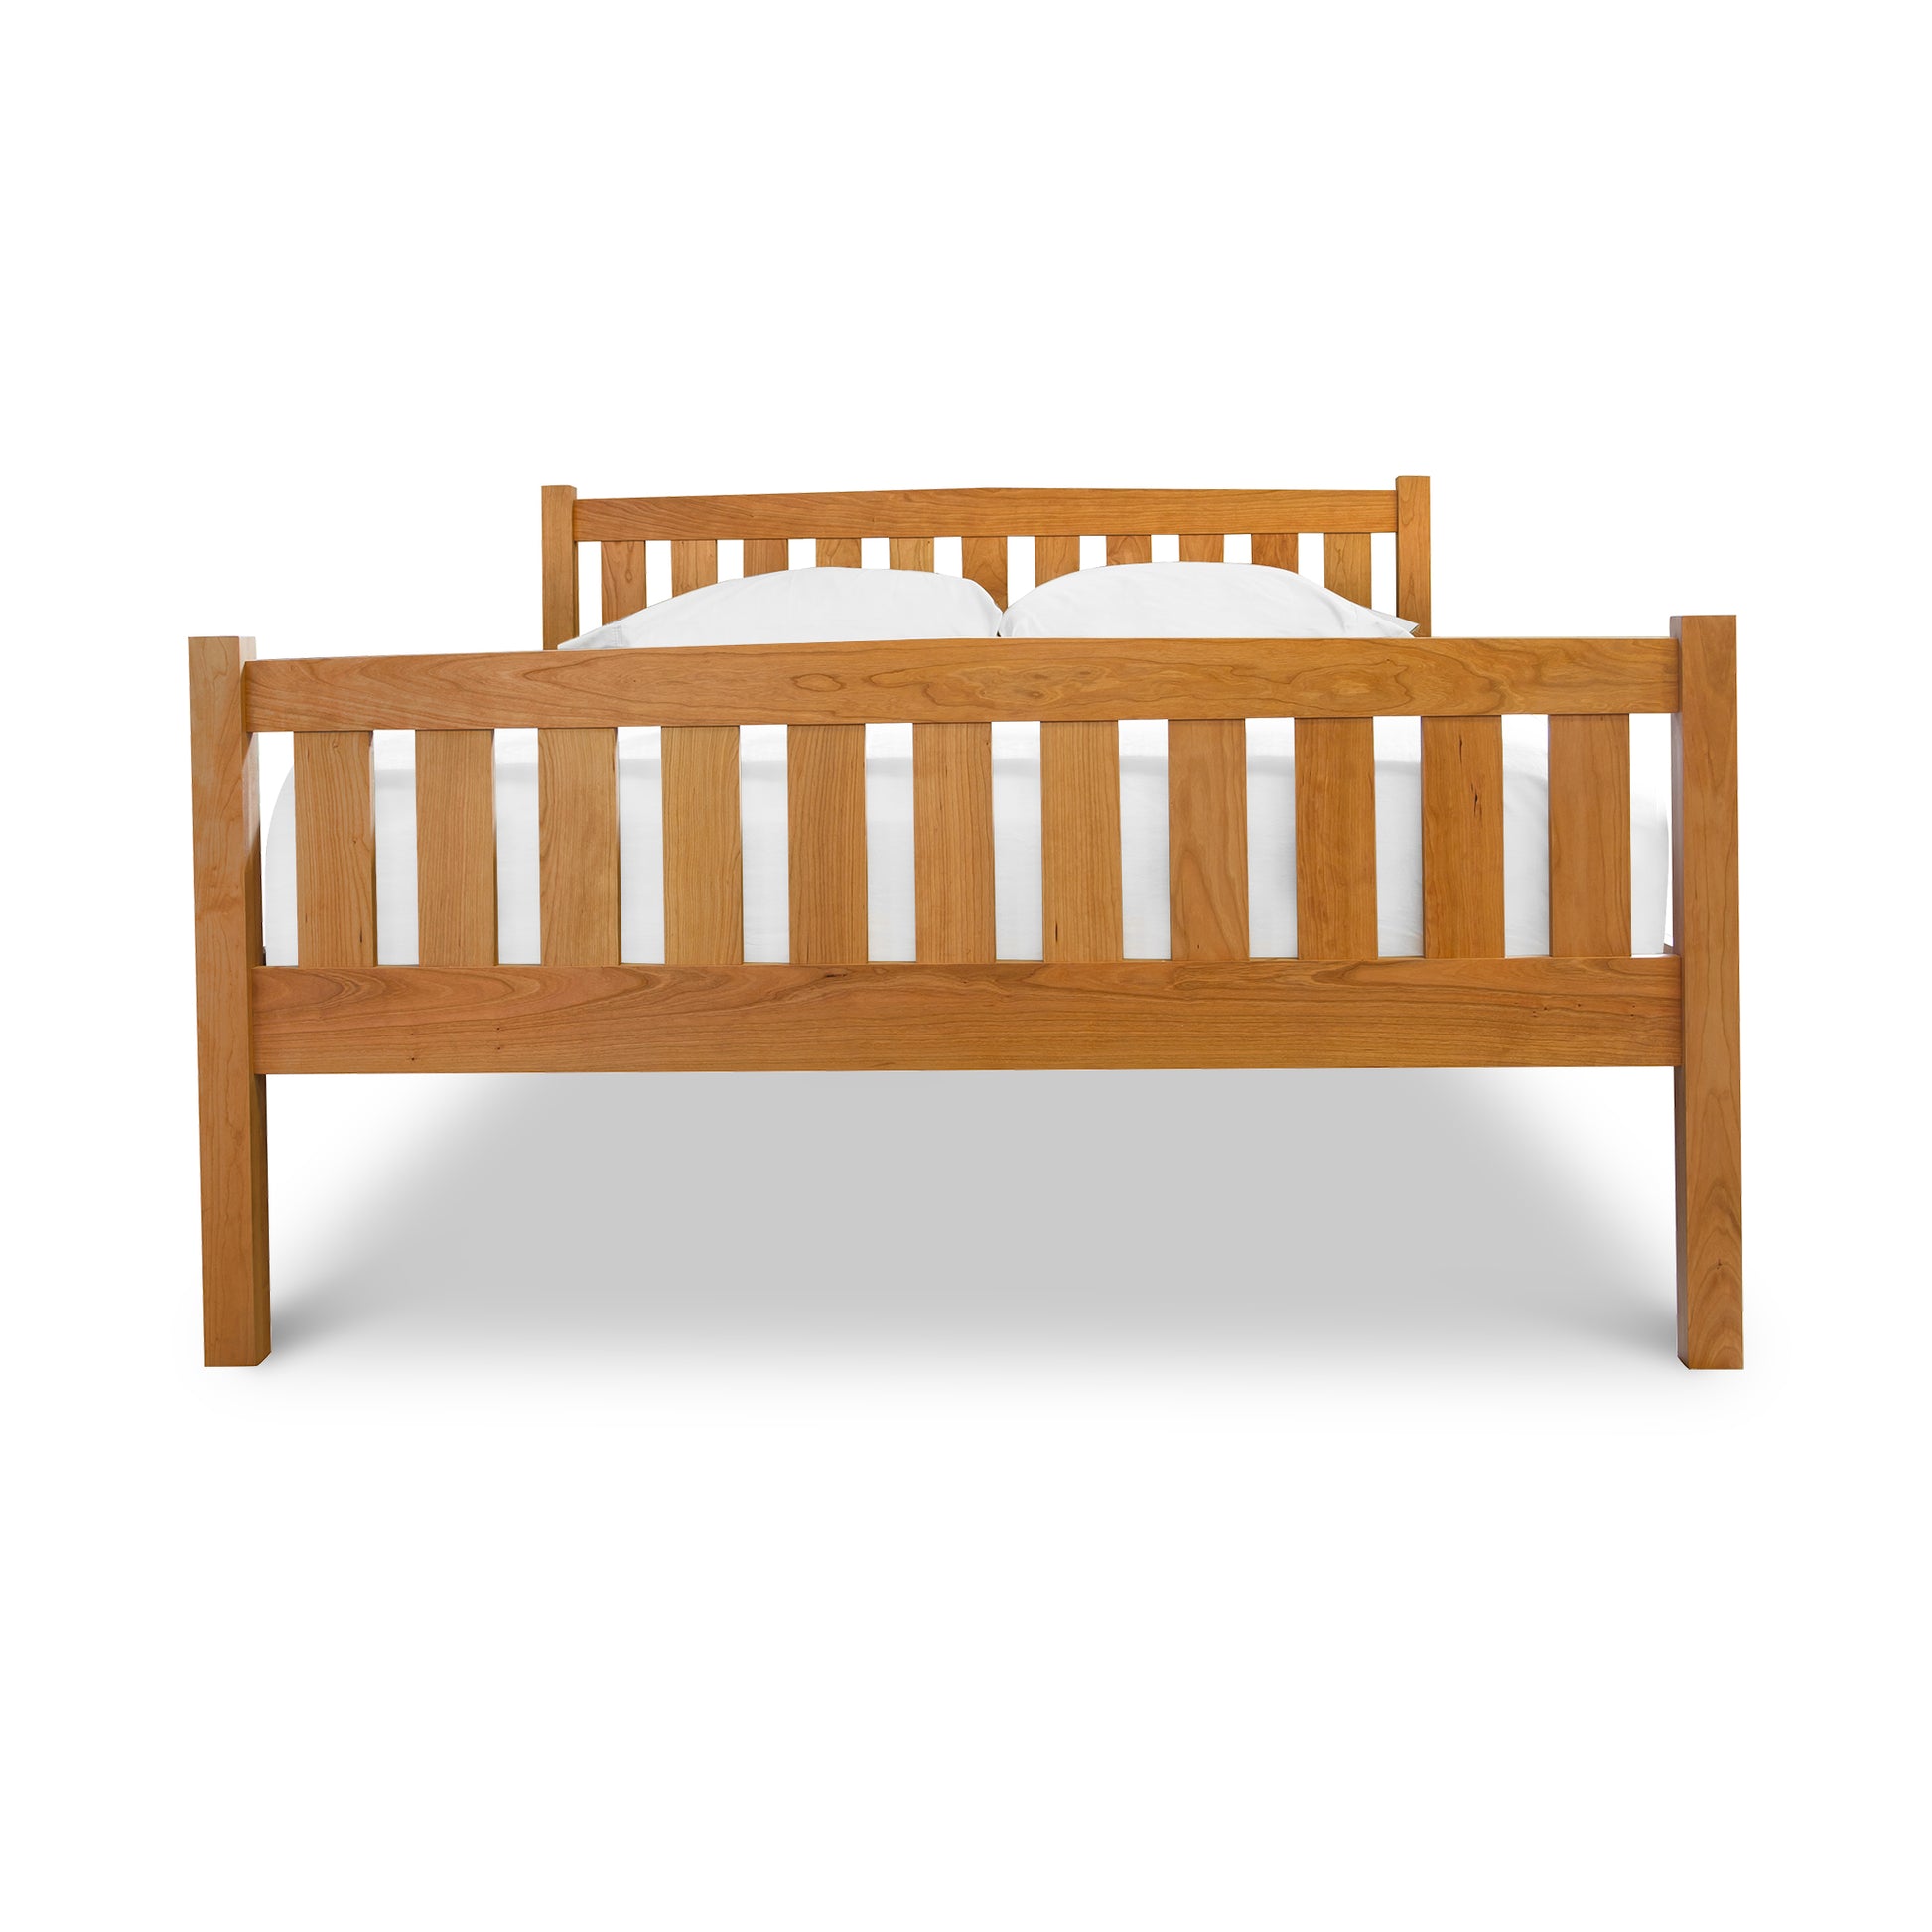 Bennington Bed with High Footboard from the Vermont Furniture Designs Collection with a simple headboard and a white mattress, isolated on a white background.